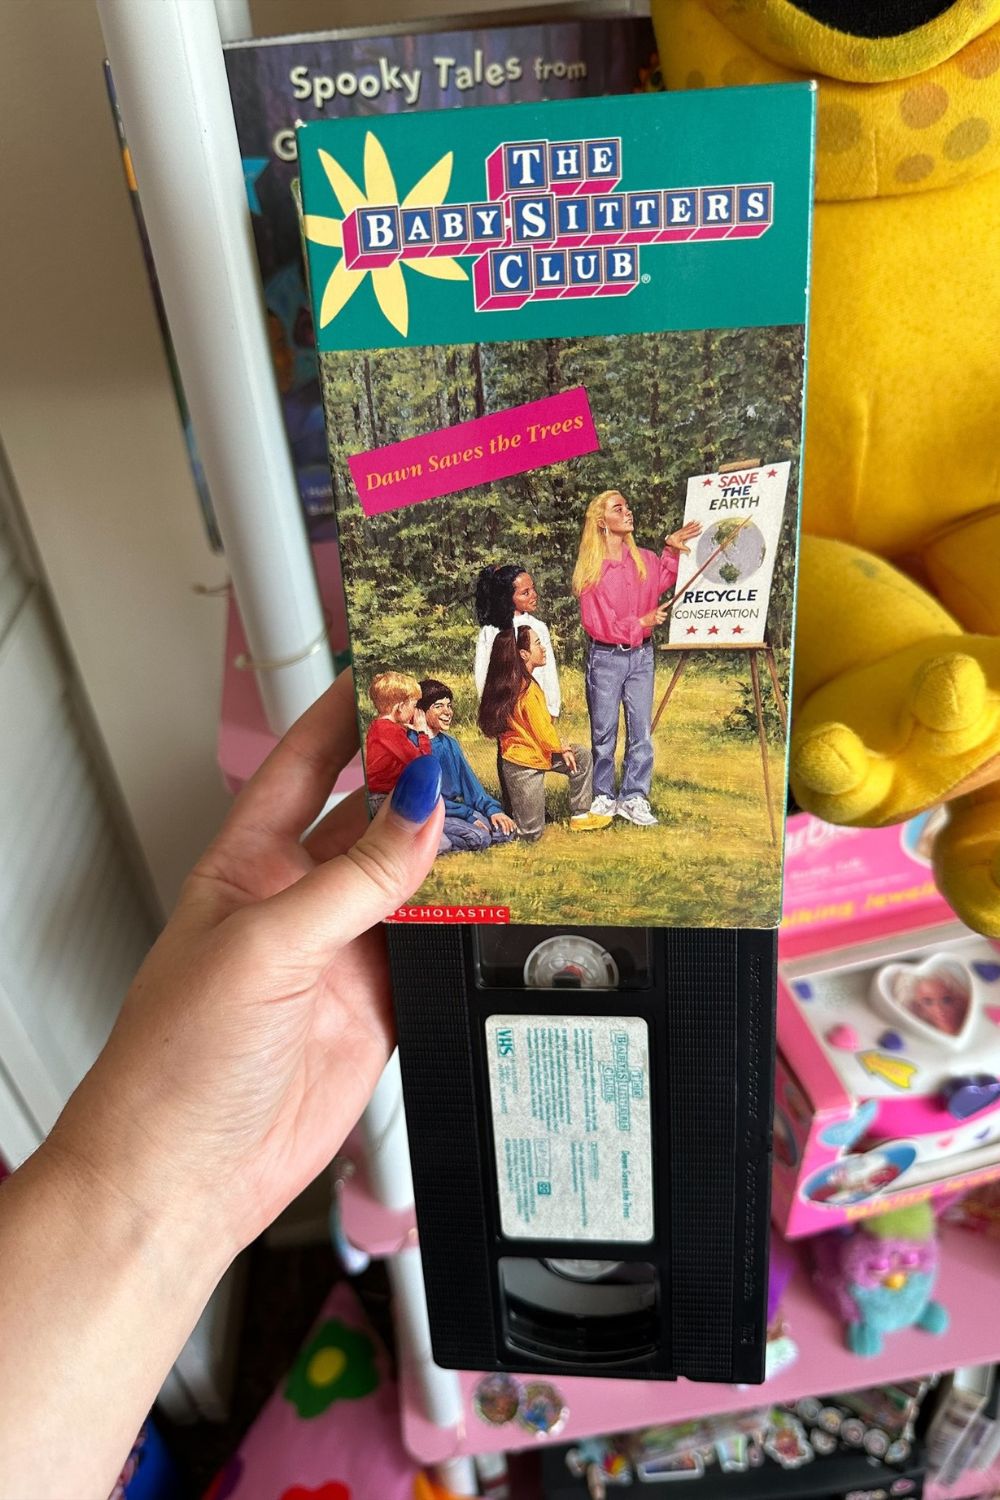 THE BABY-SITTERS CLUB "DAWN SAVES THE TREES" VHS*